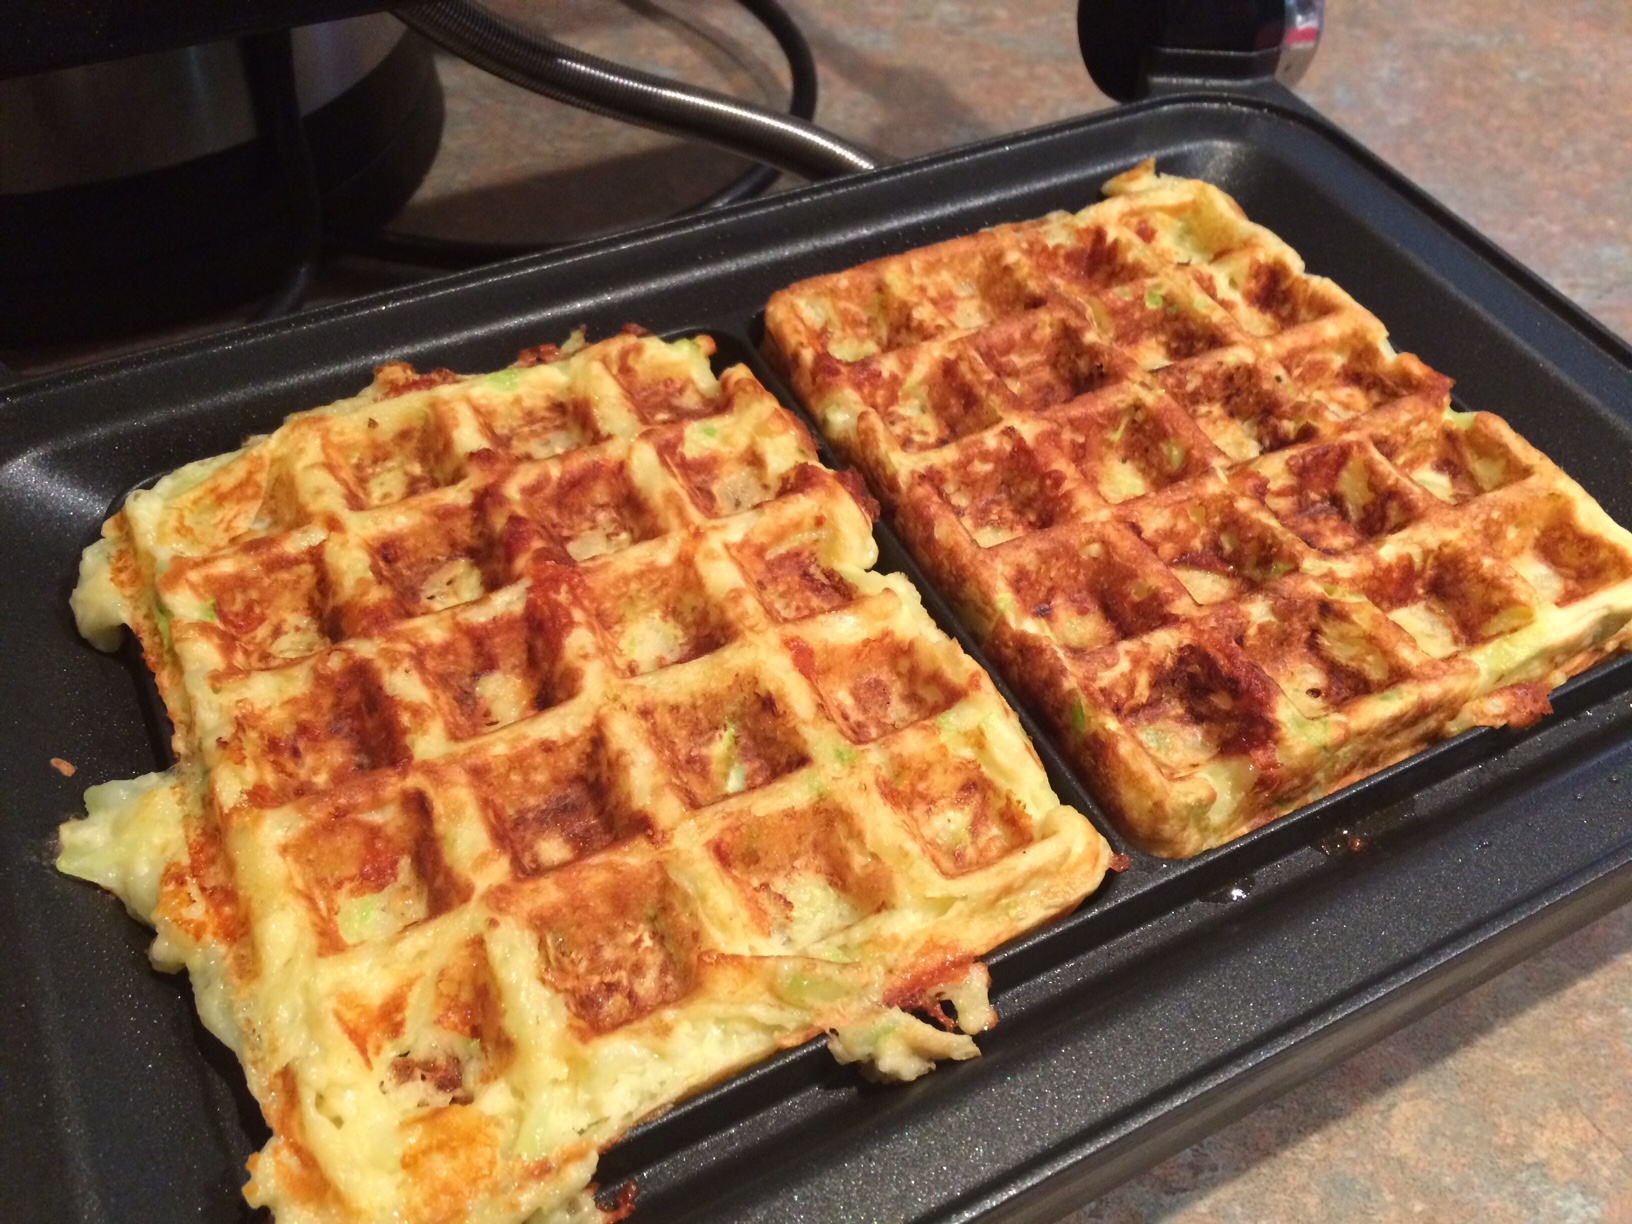 Zucchini and Cheese Waffles in the Kambrook Belgium Dual Waffle Press